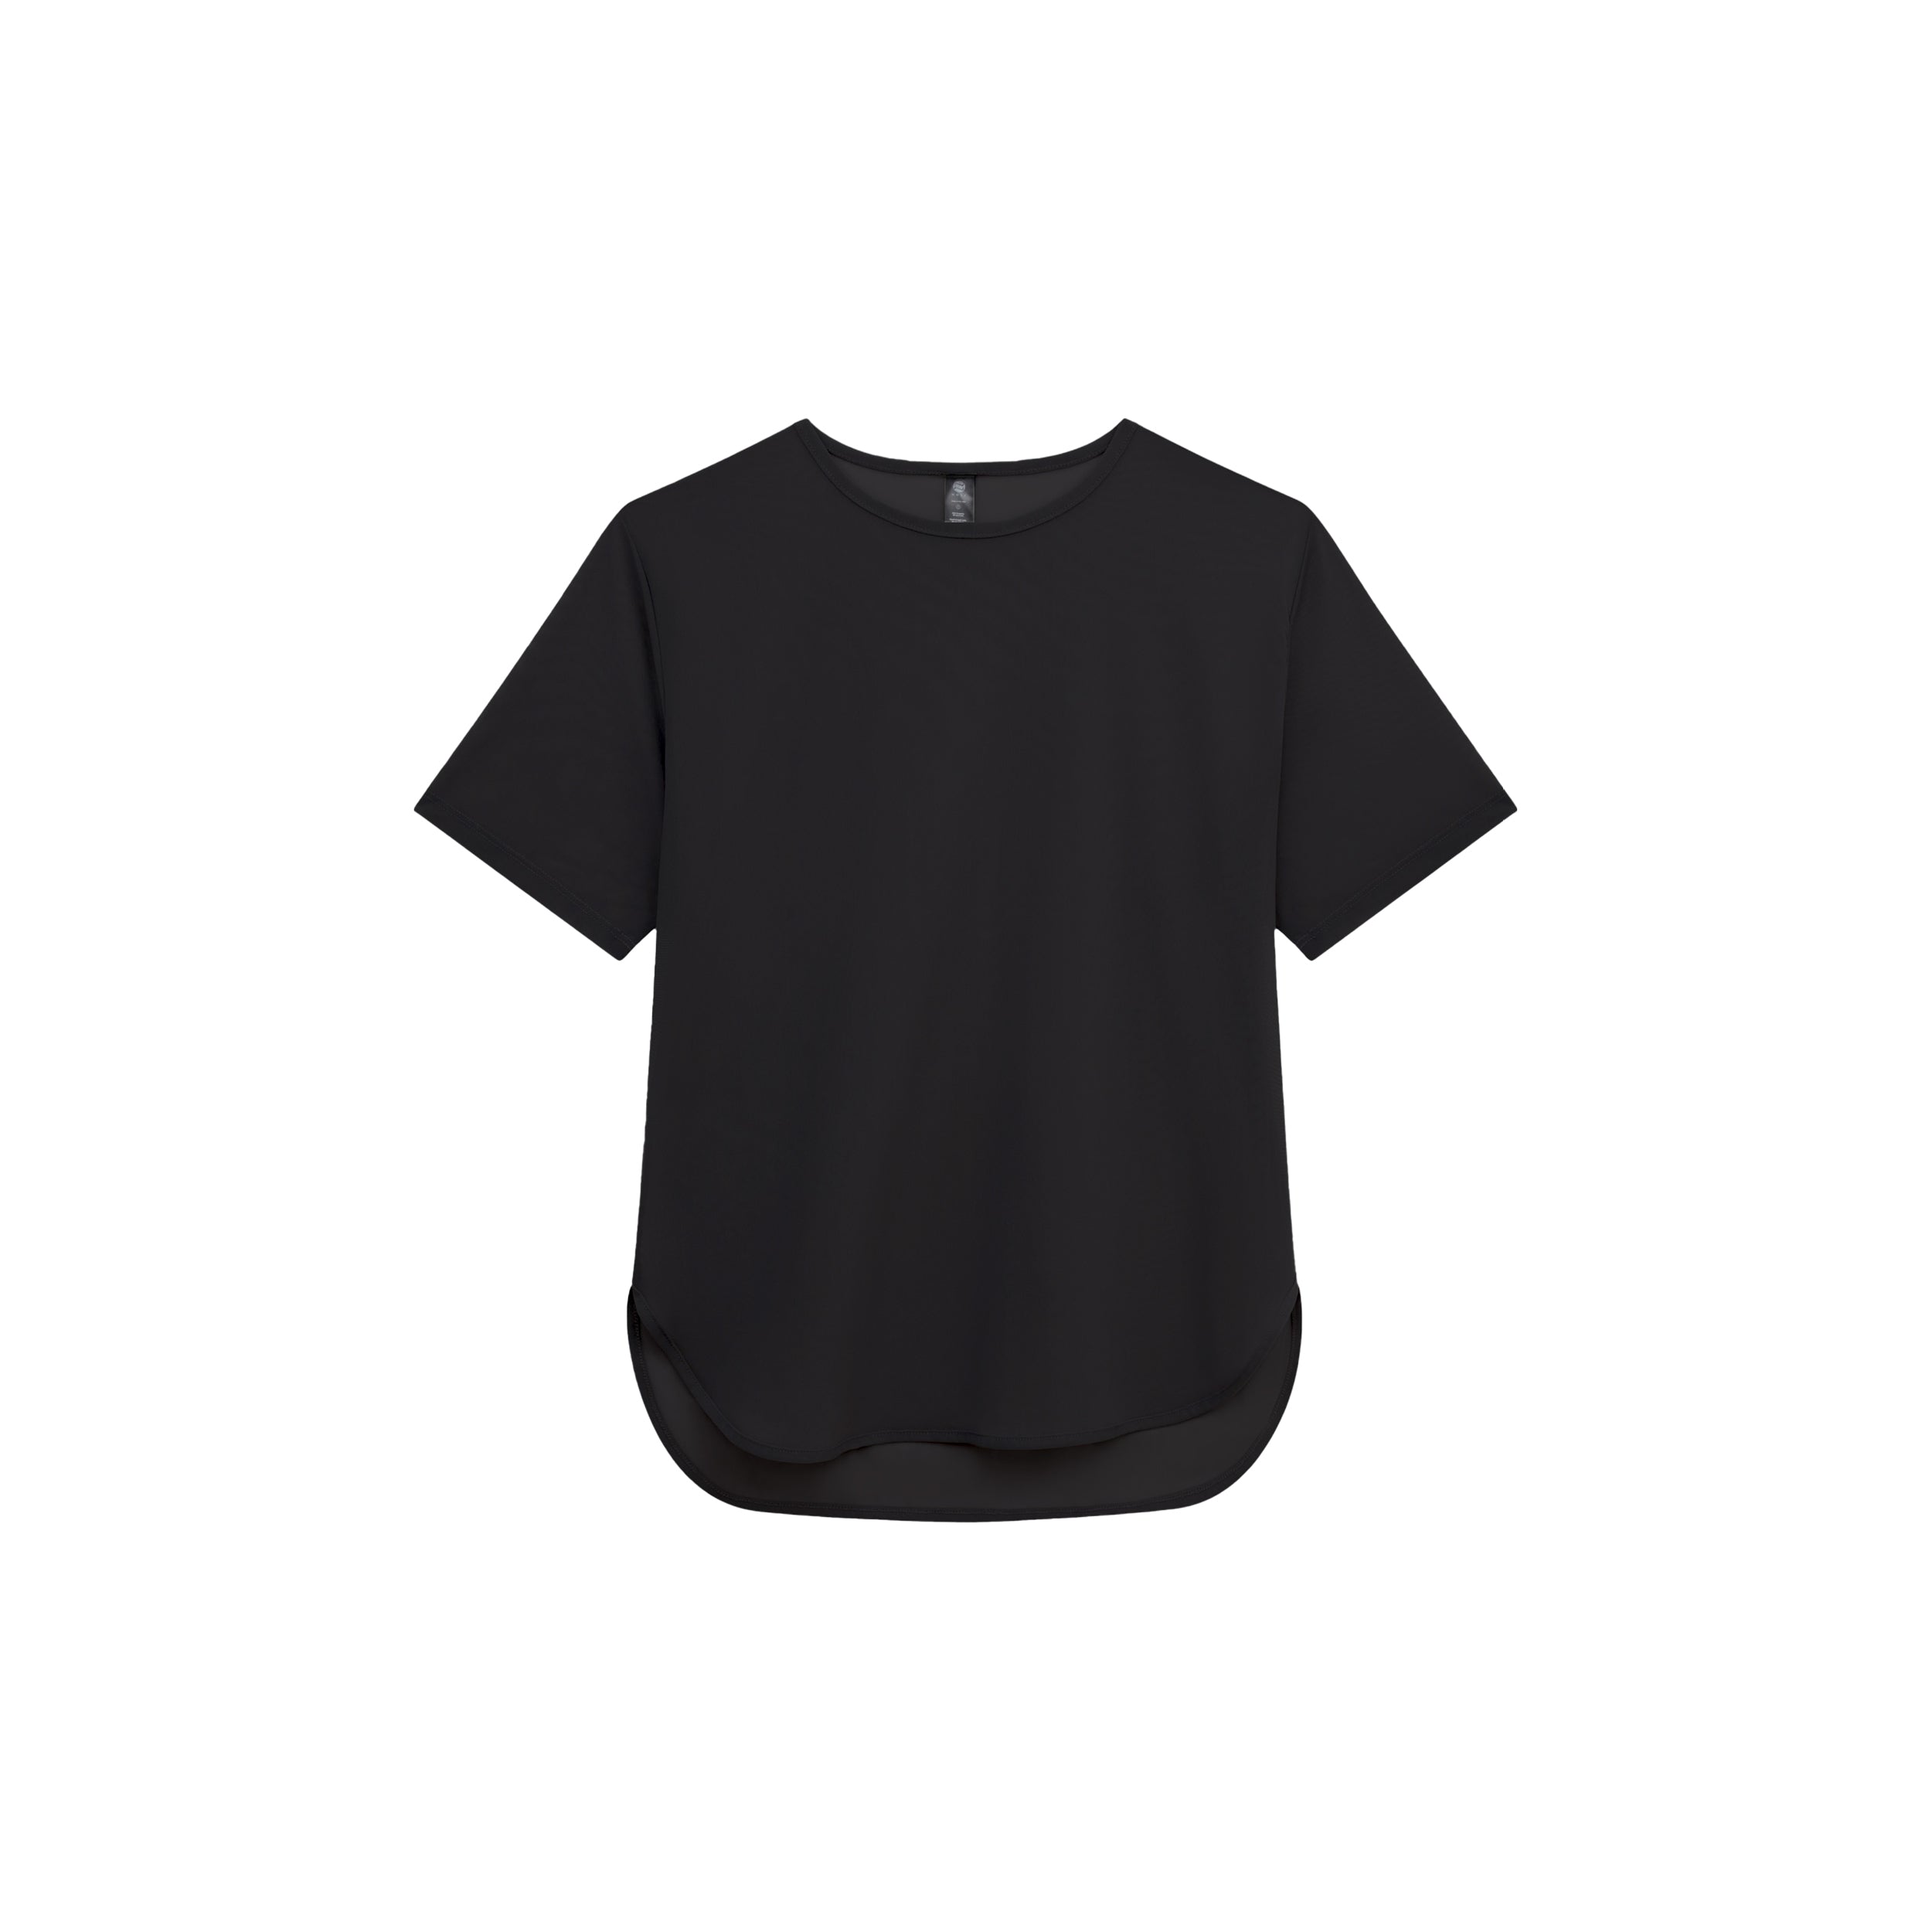 Product shot of ultra-stretchy and silky soft black mesh shirt, featuring short sleeves and classic neckline